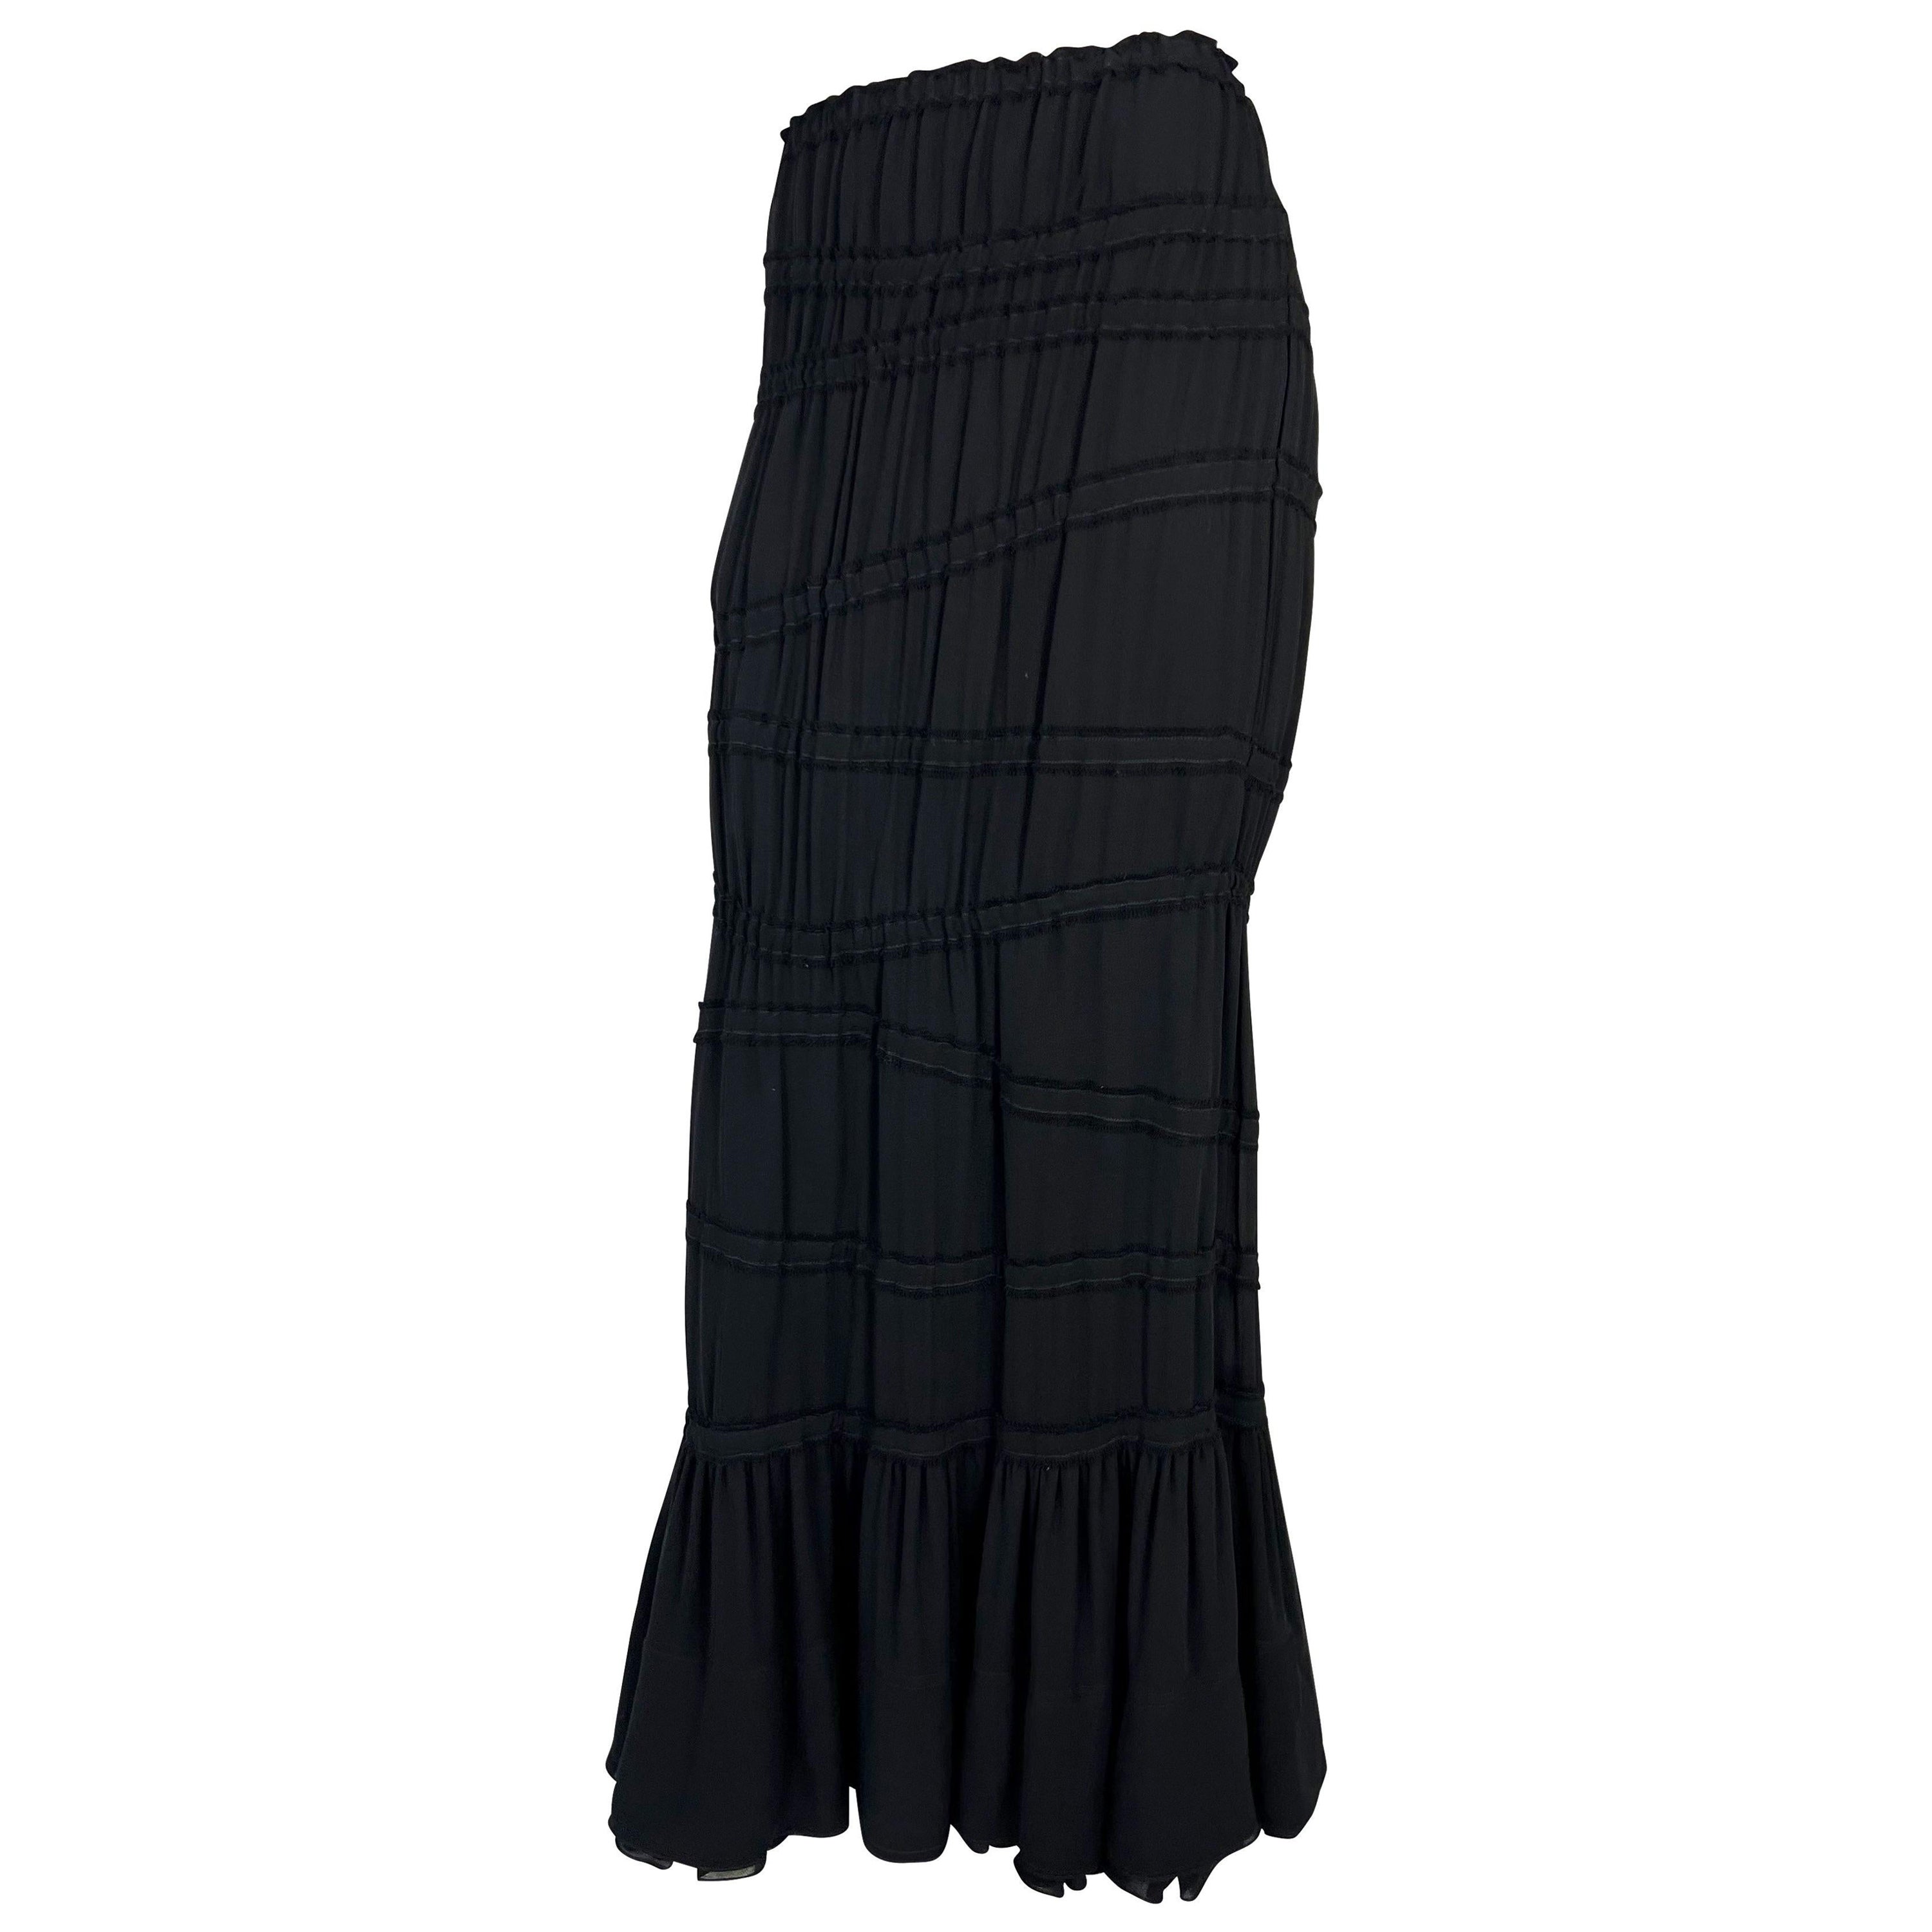 F/W 2001 Yves Saint Laurent by Tom Ford Runway Ruched Stretch Flare Maxi Skirt For Sale